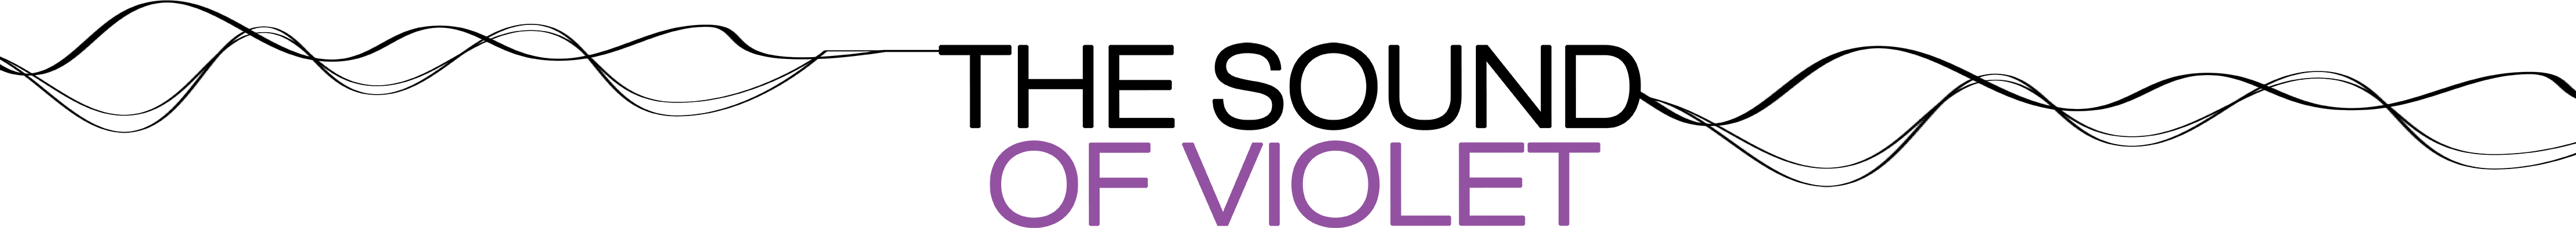 The Sound of Violet Official Site Logo